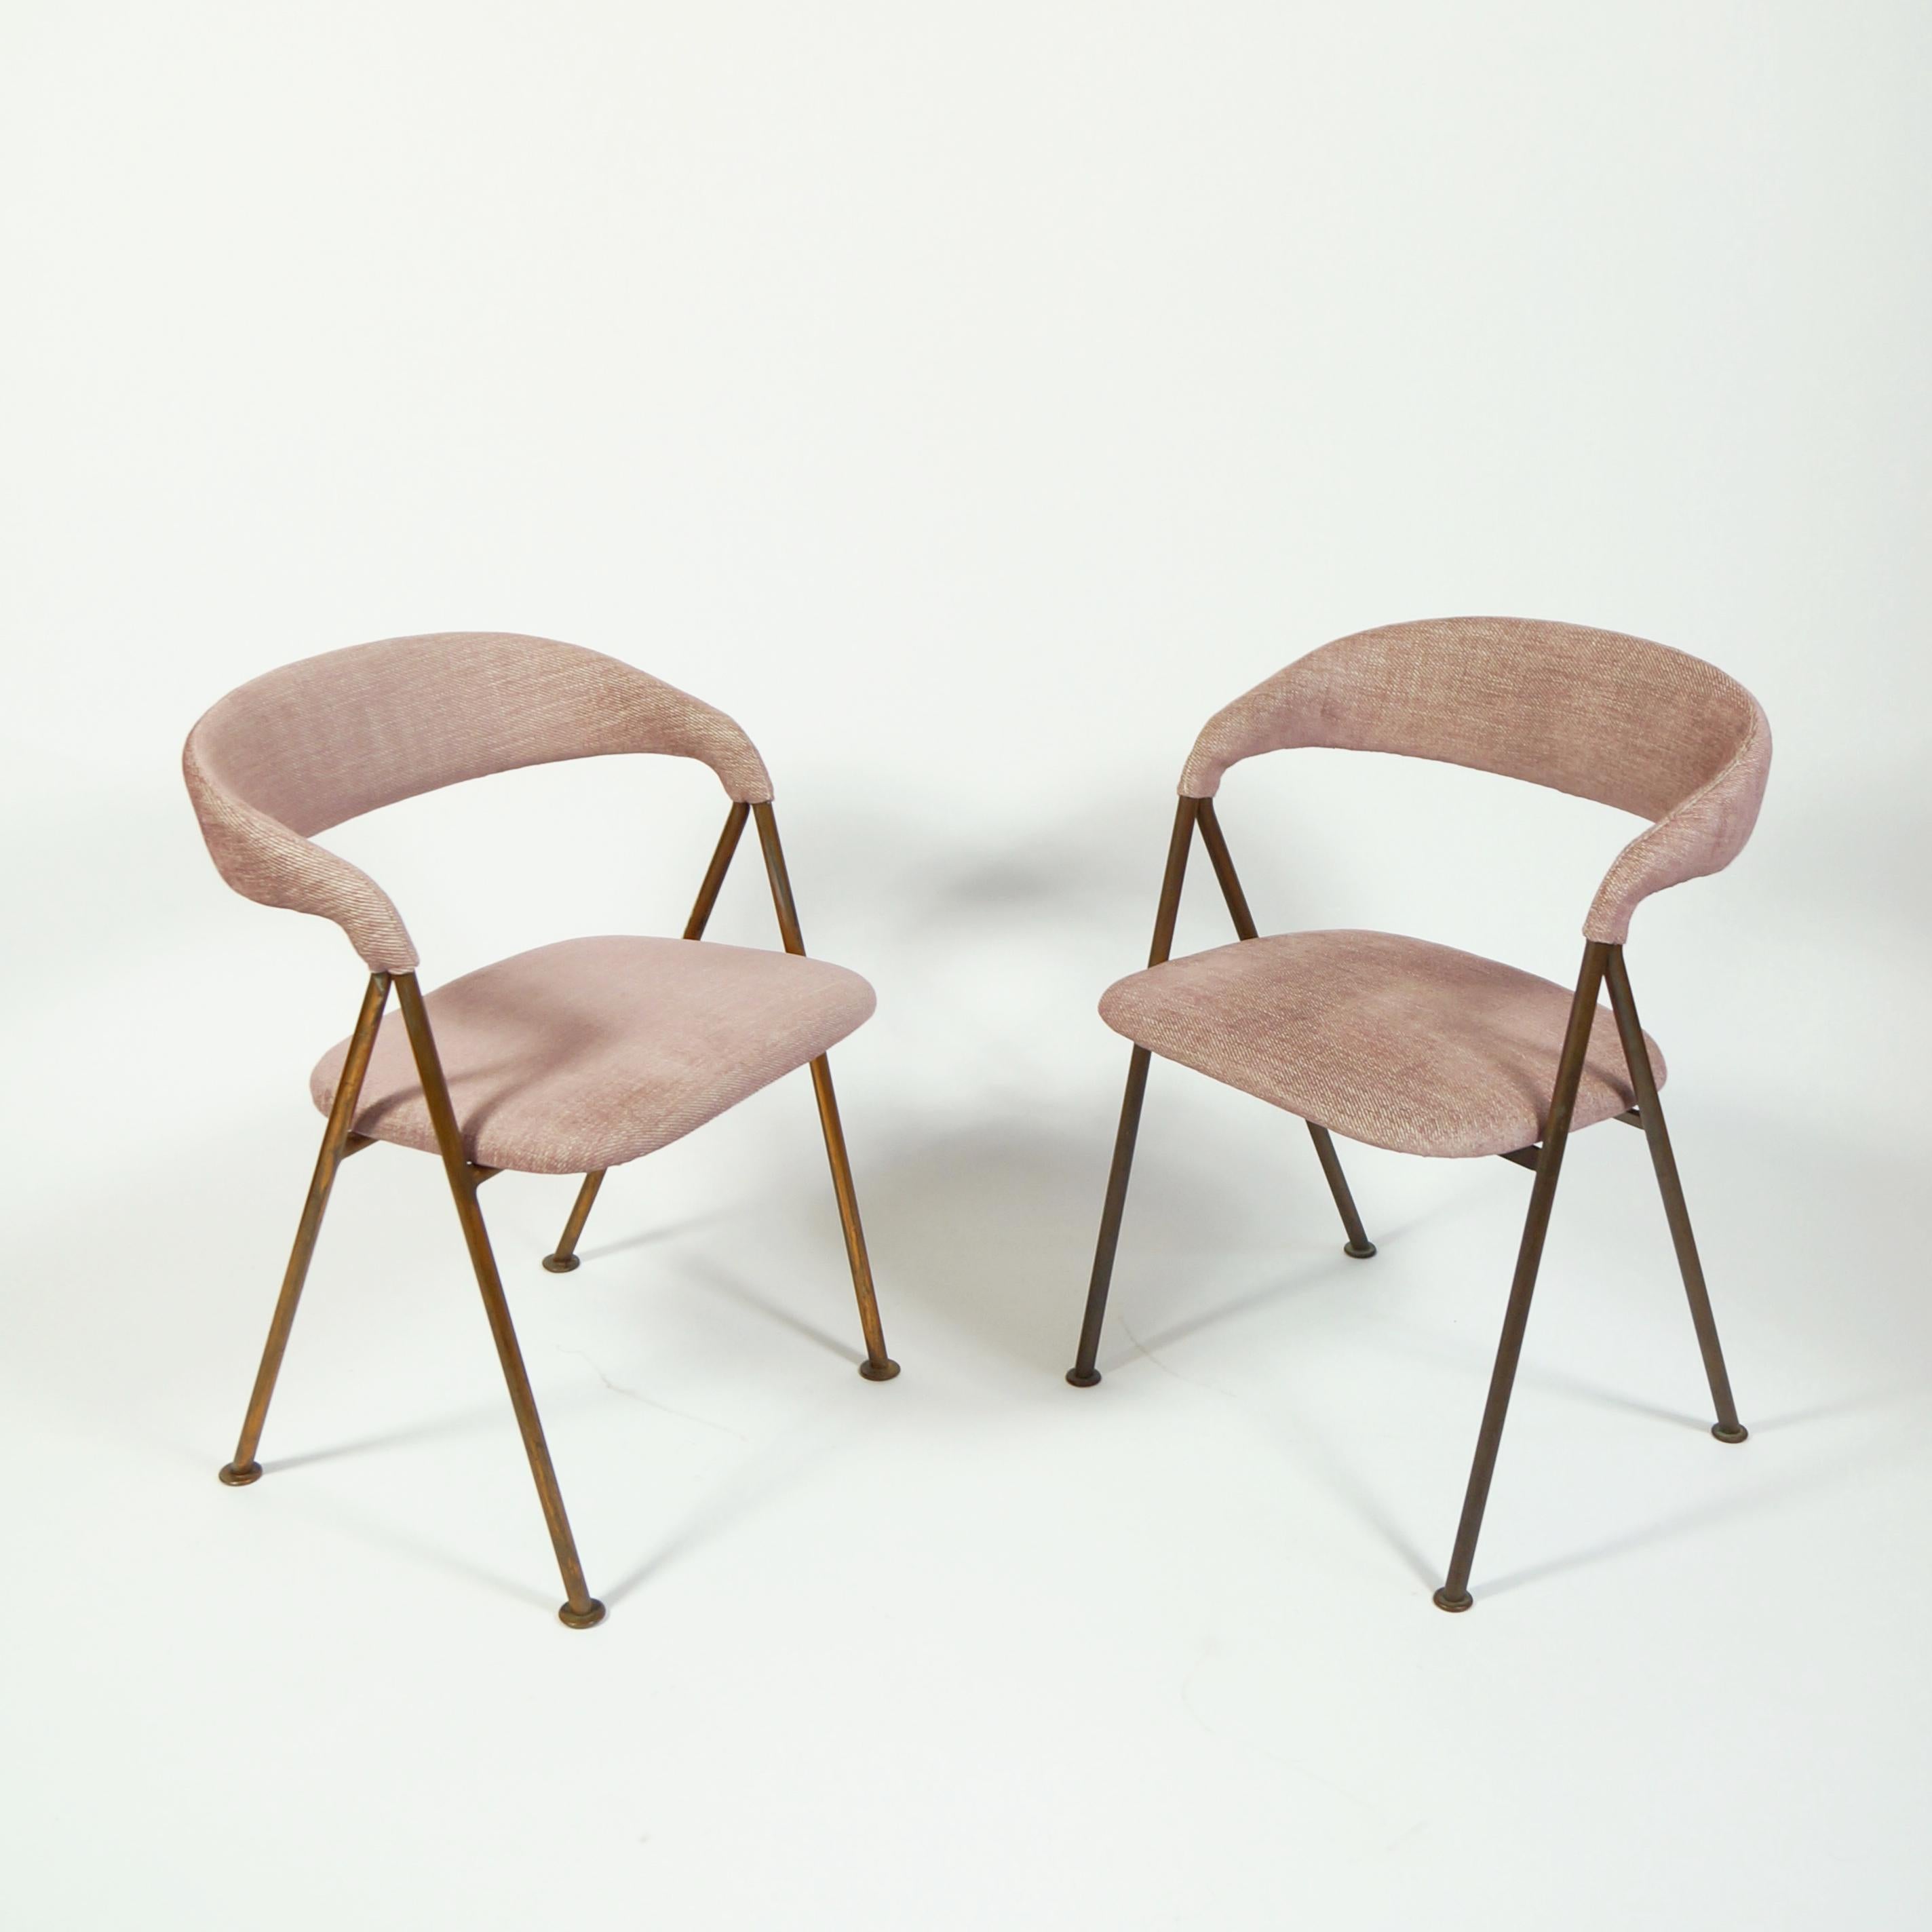 Rare chairs designed by Maija-Liisa Komulainen in the 1950s. These chairs come from
Helsinki Vaakuna hotel, completed in 1952 for the Helsinki Olympics. 

Copper frame and upholstery remodeled with Lauritzon's high quality Nadir